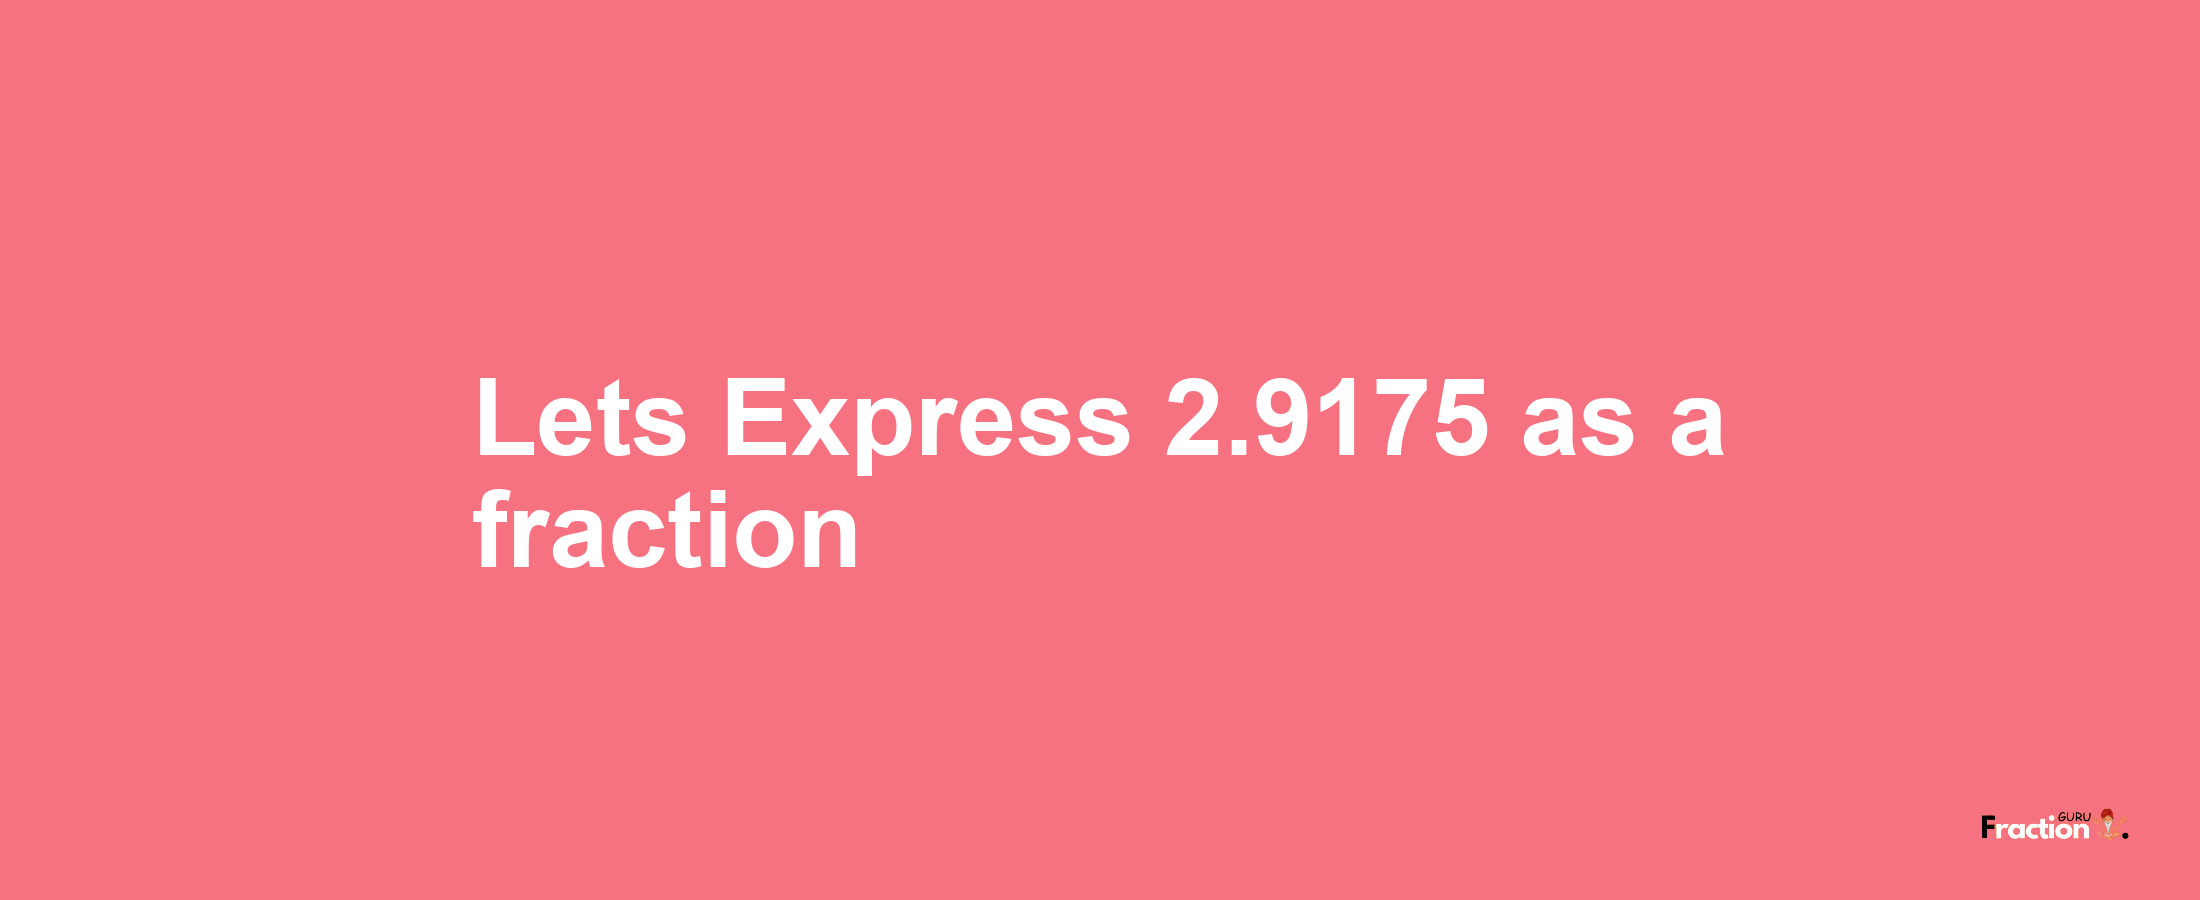 Lets Express 2.9175 as afraction